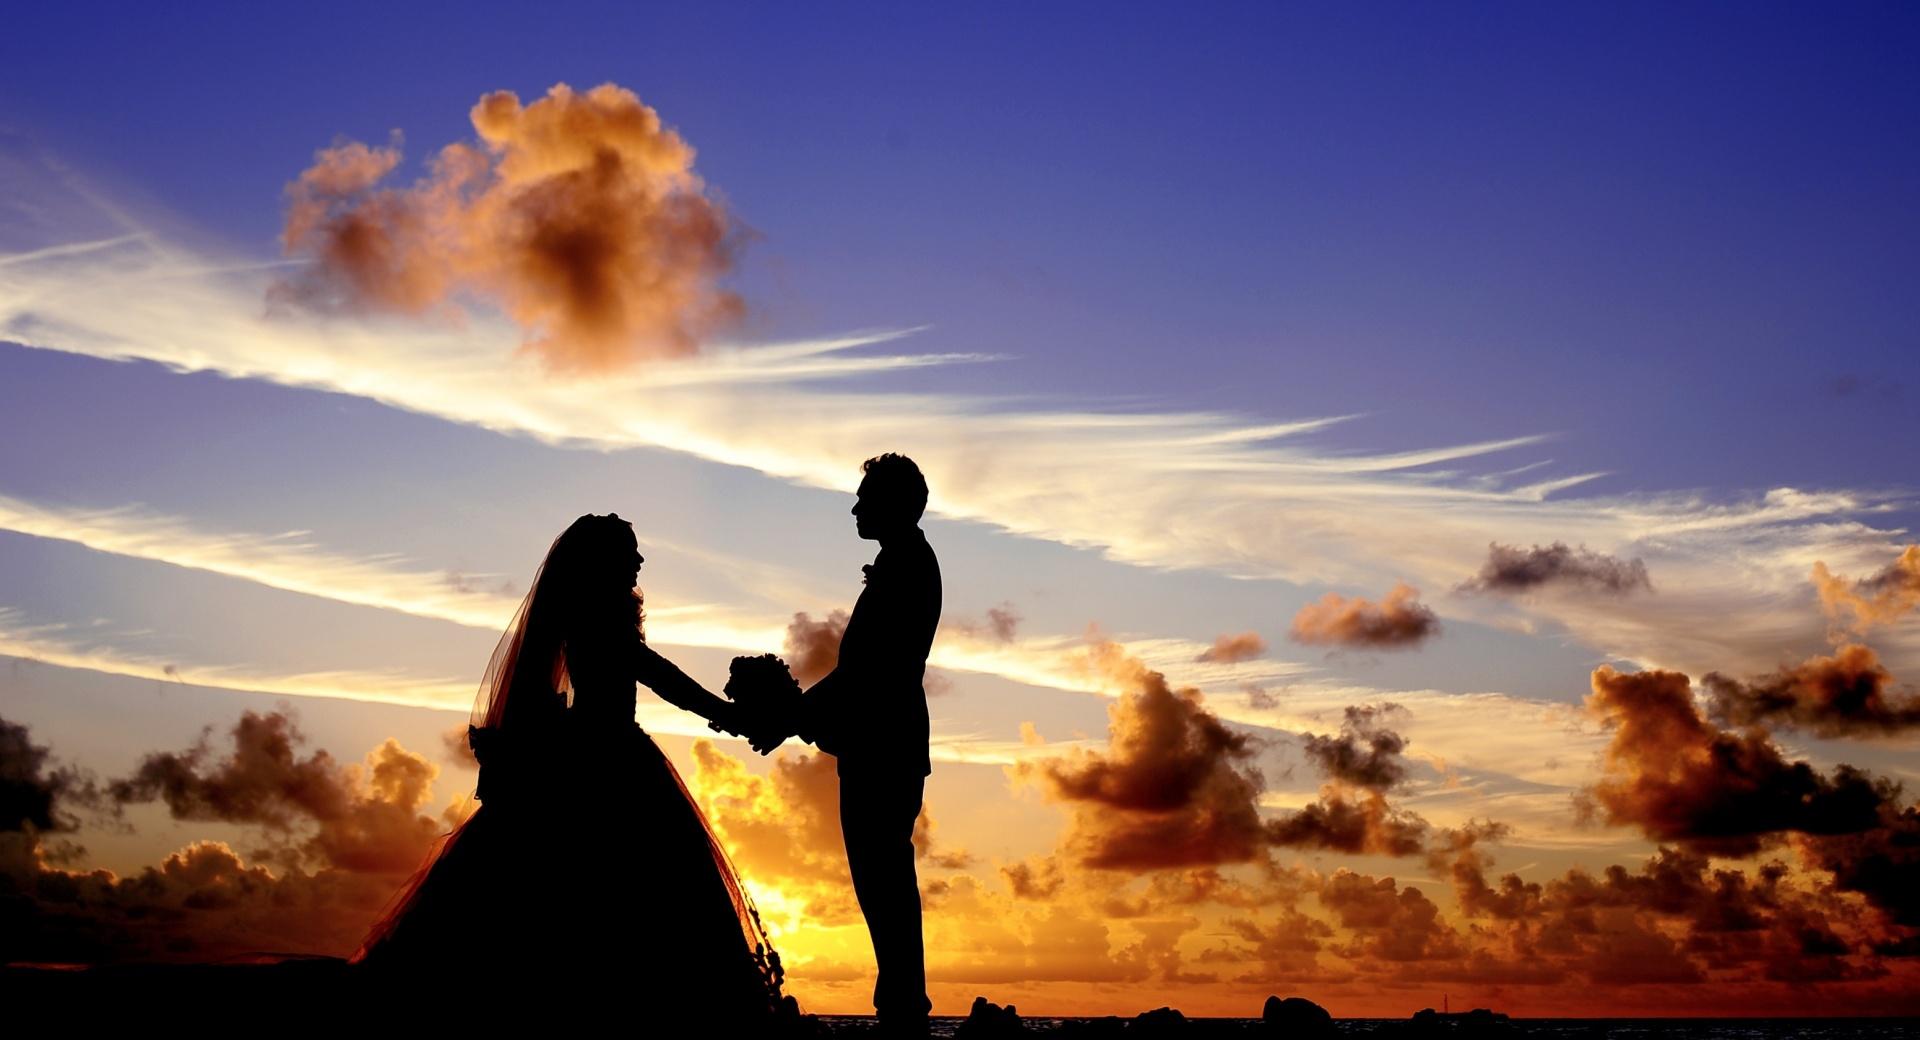 Wedding Tropical Sunrise Silhouette wallpapers HD quality